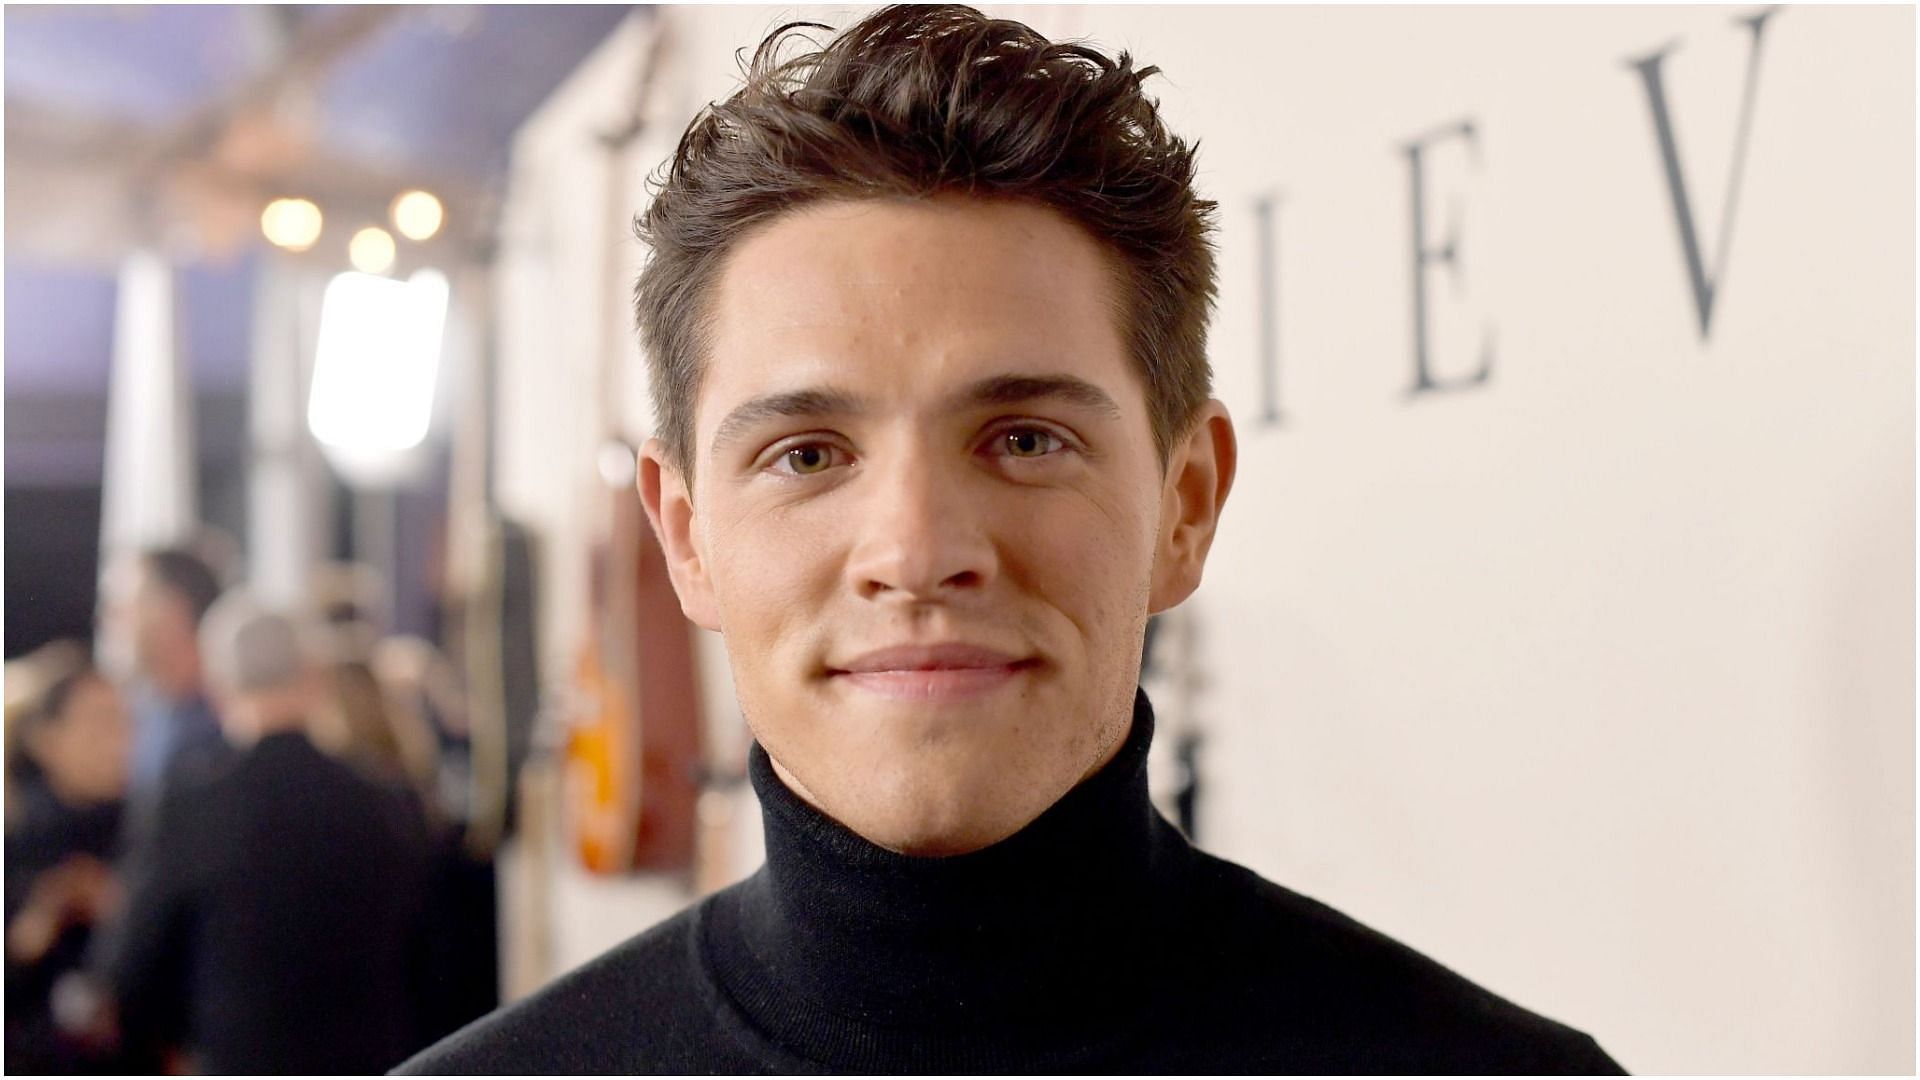 Casey Cott recently tied the knot with his girlfriend Nichola Basara (Image by Matt Winkelmeyer via Getty Images)